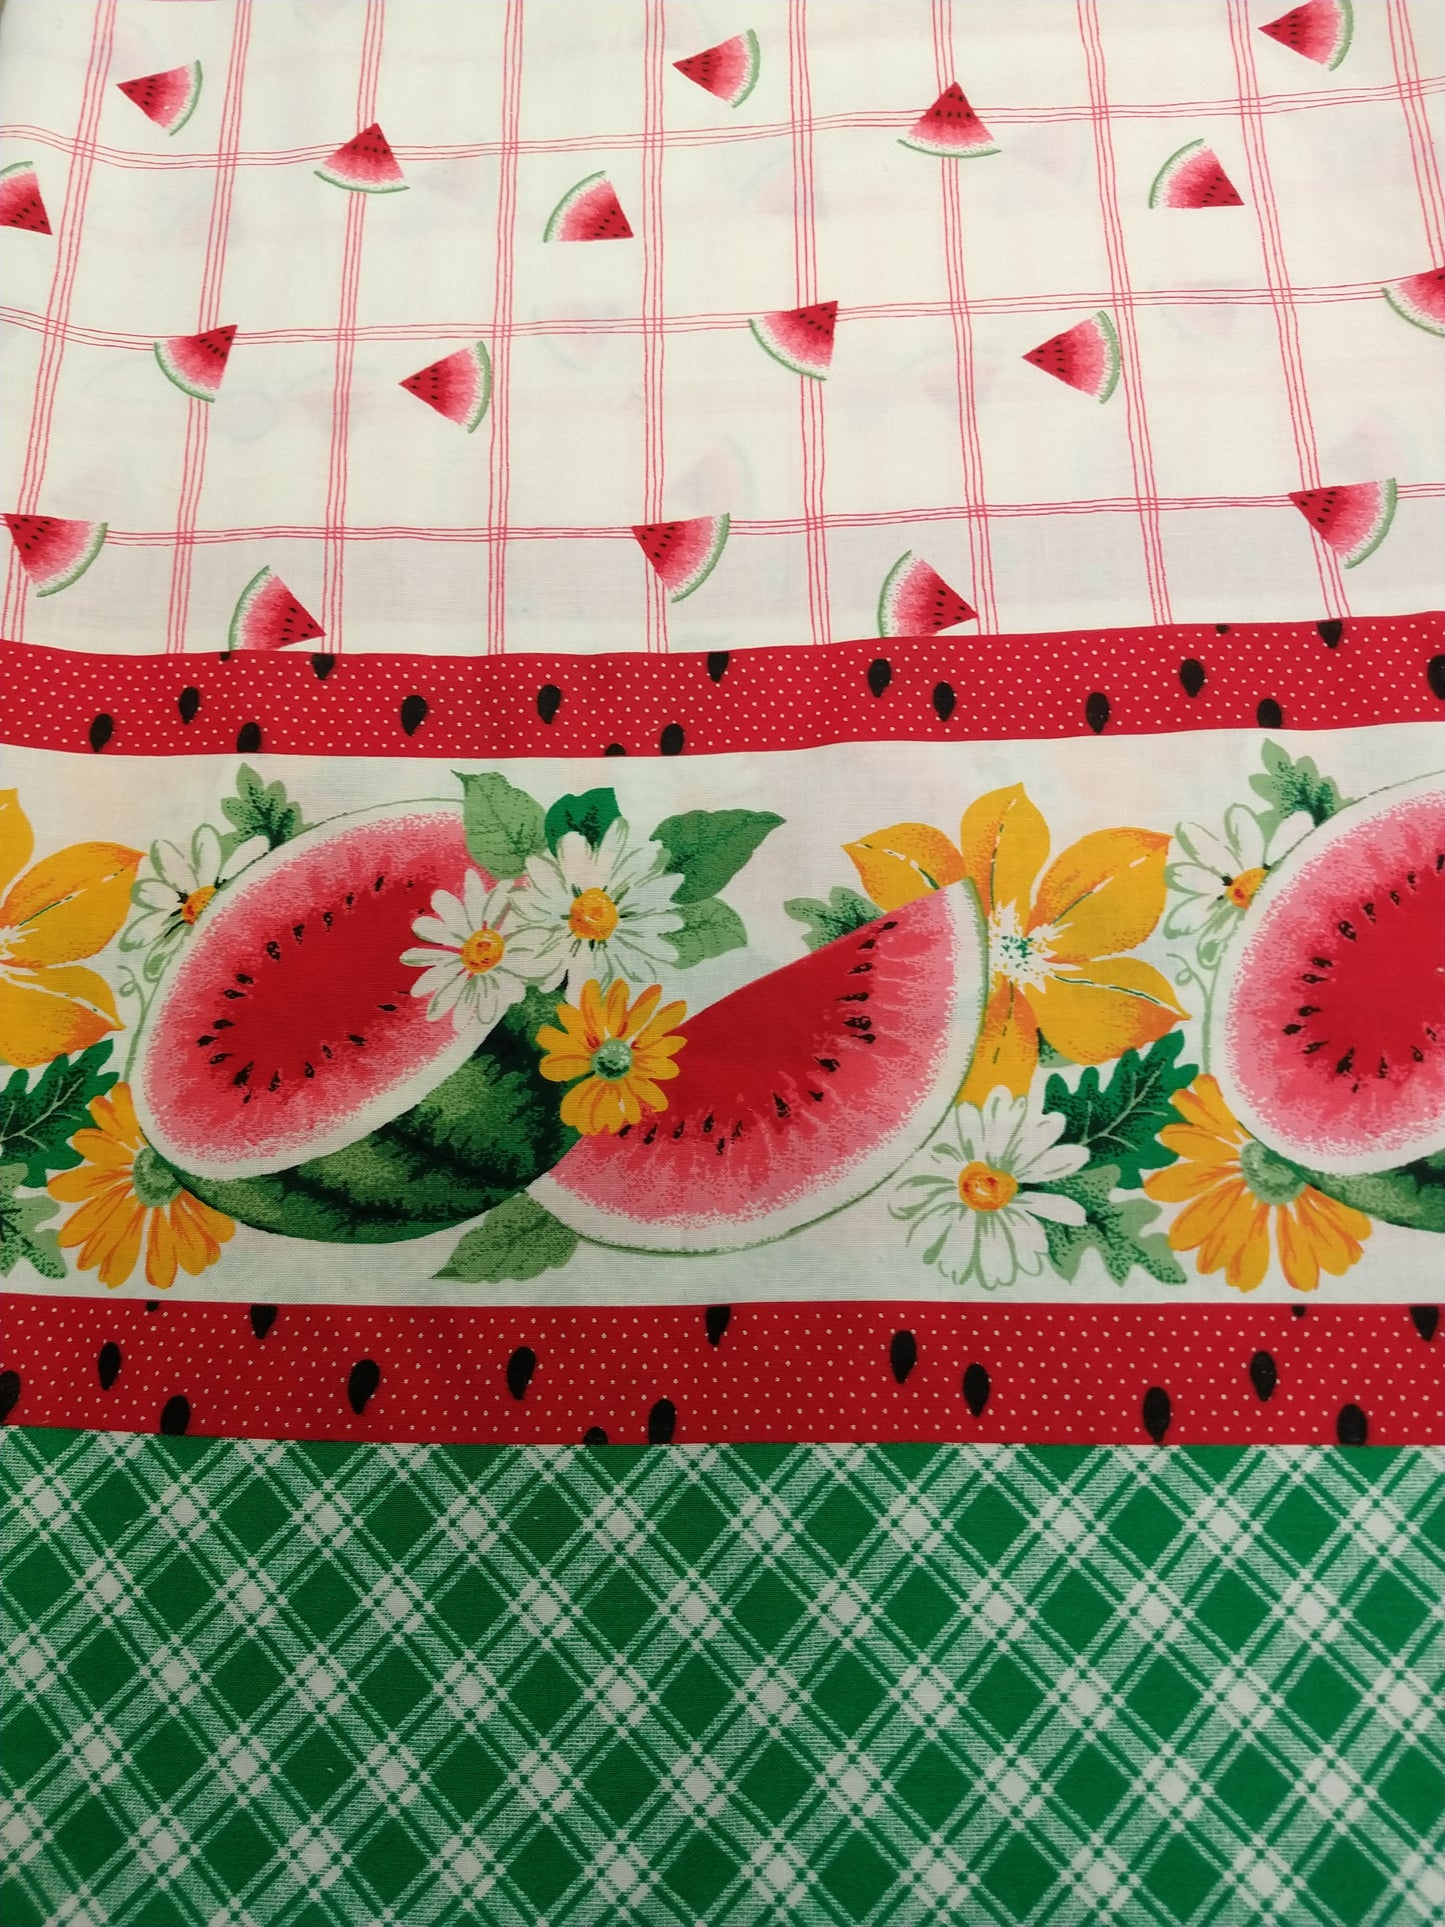 Watermelon Picnic Table Fabric - End of Bolt